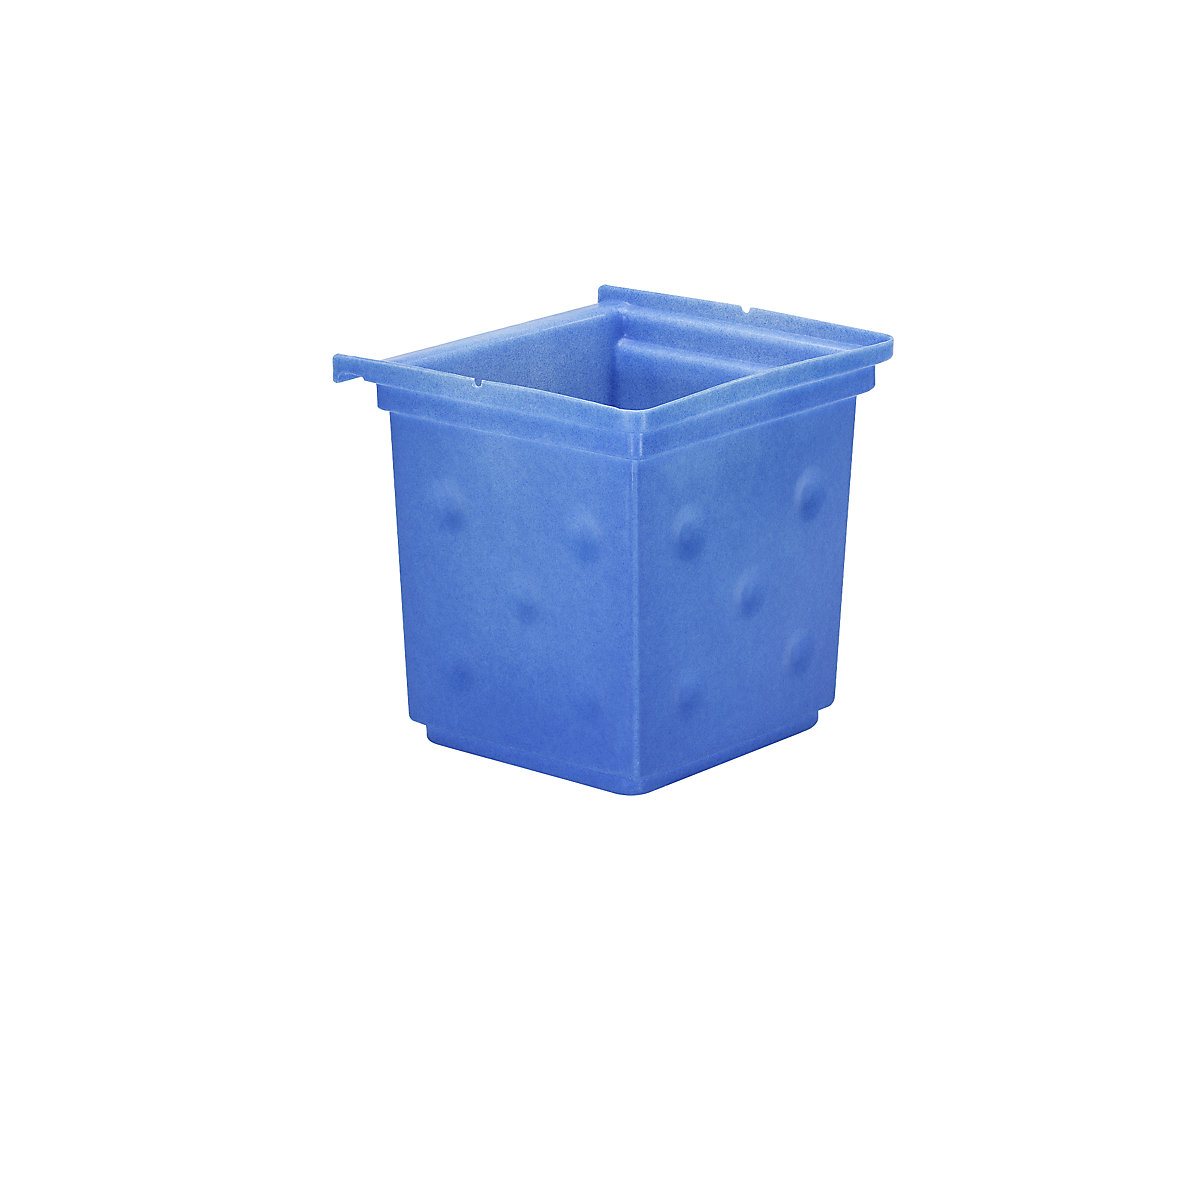 Detachable filling container made of PE